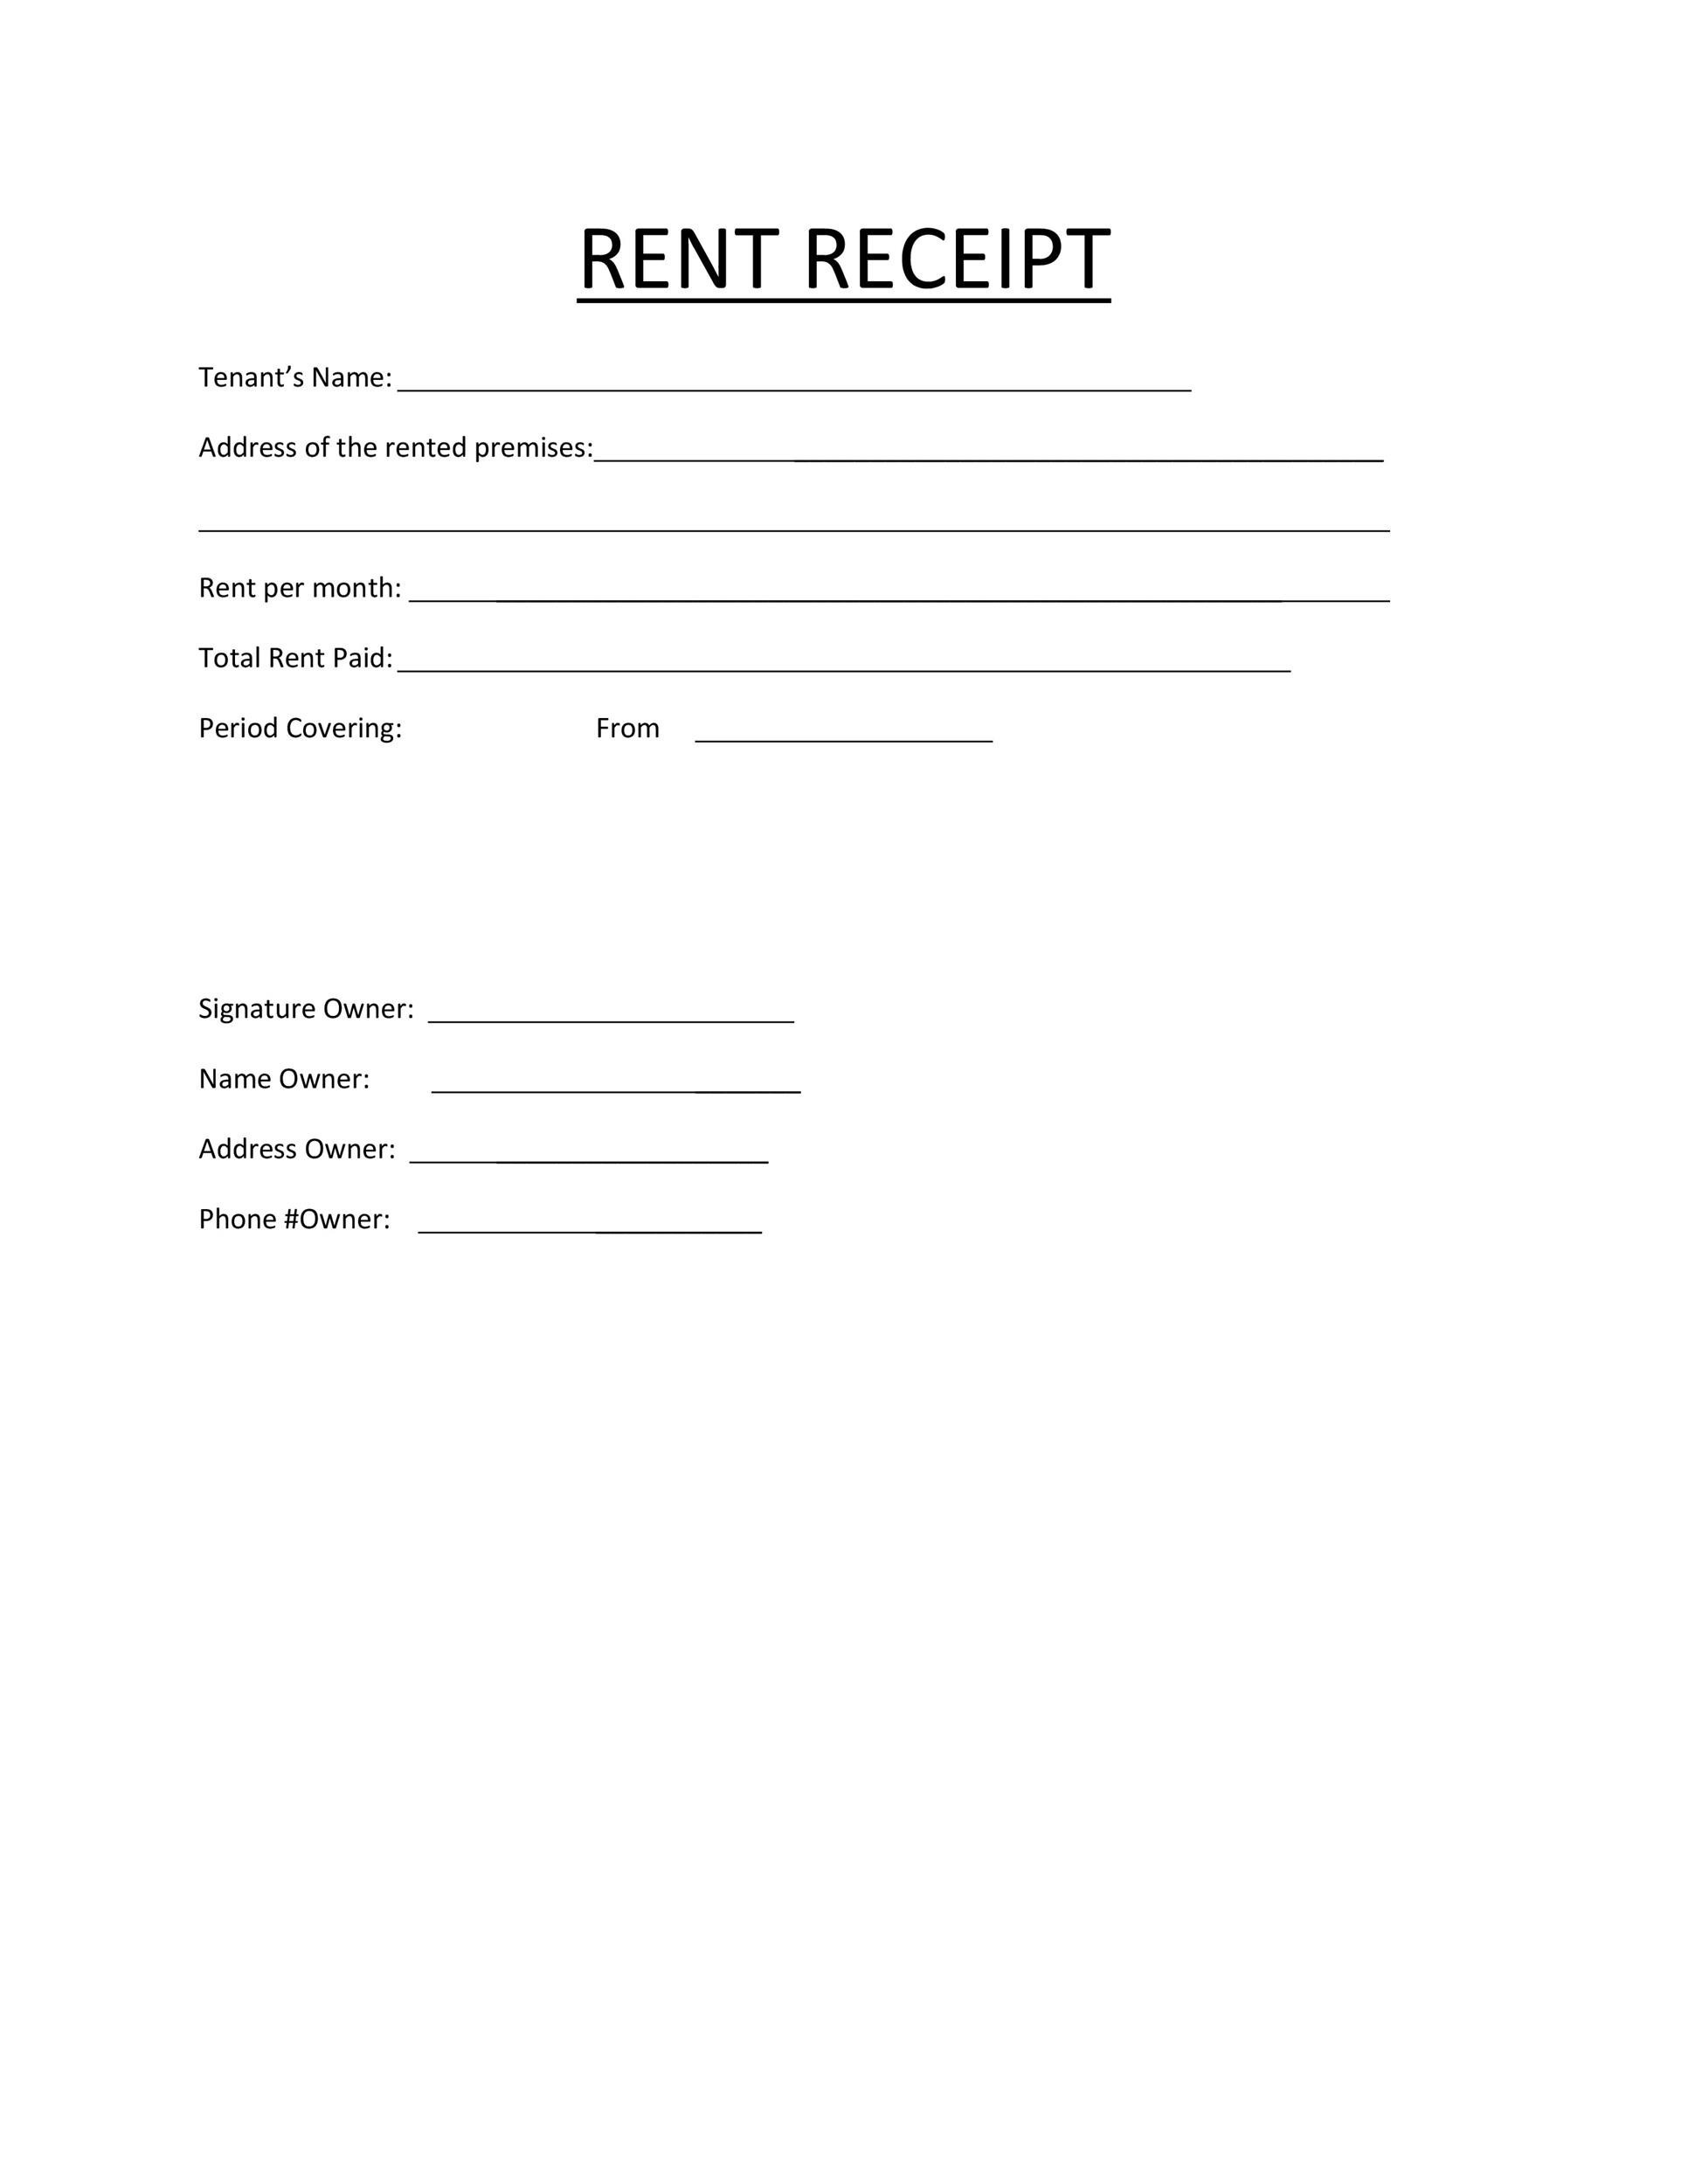 receipt-sample-download-master-of-template-document